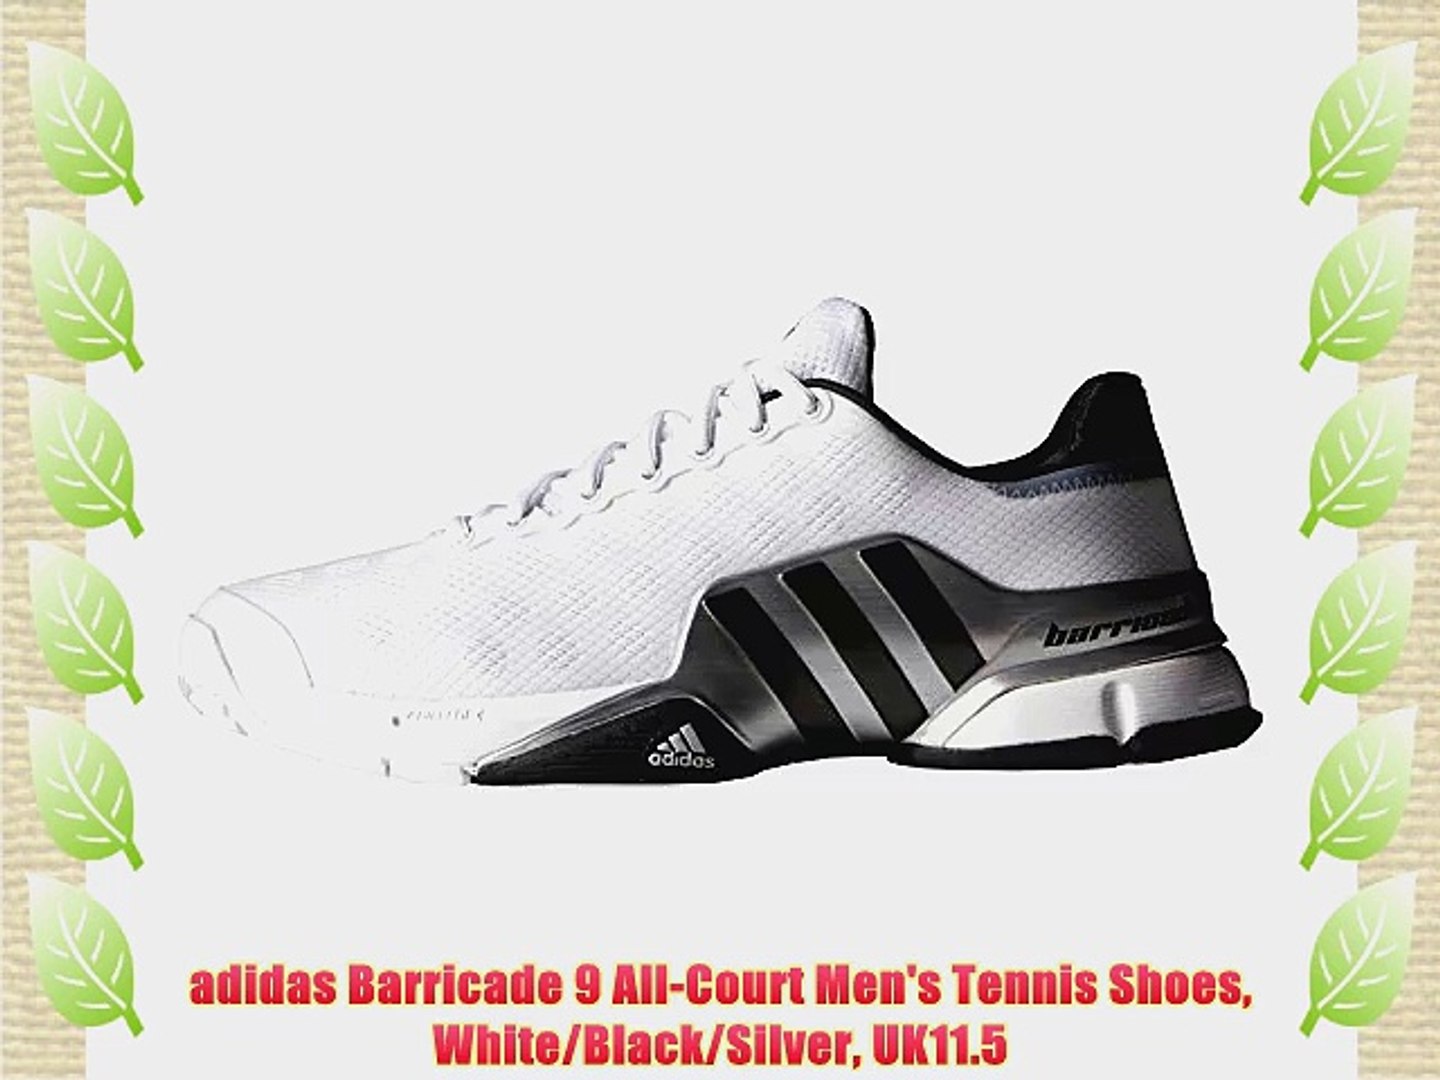 adidas Barricade 9 All-Court Men's Tennis Shoes White/Black/Silver UK11.5 -  video Dailymotion